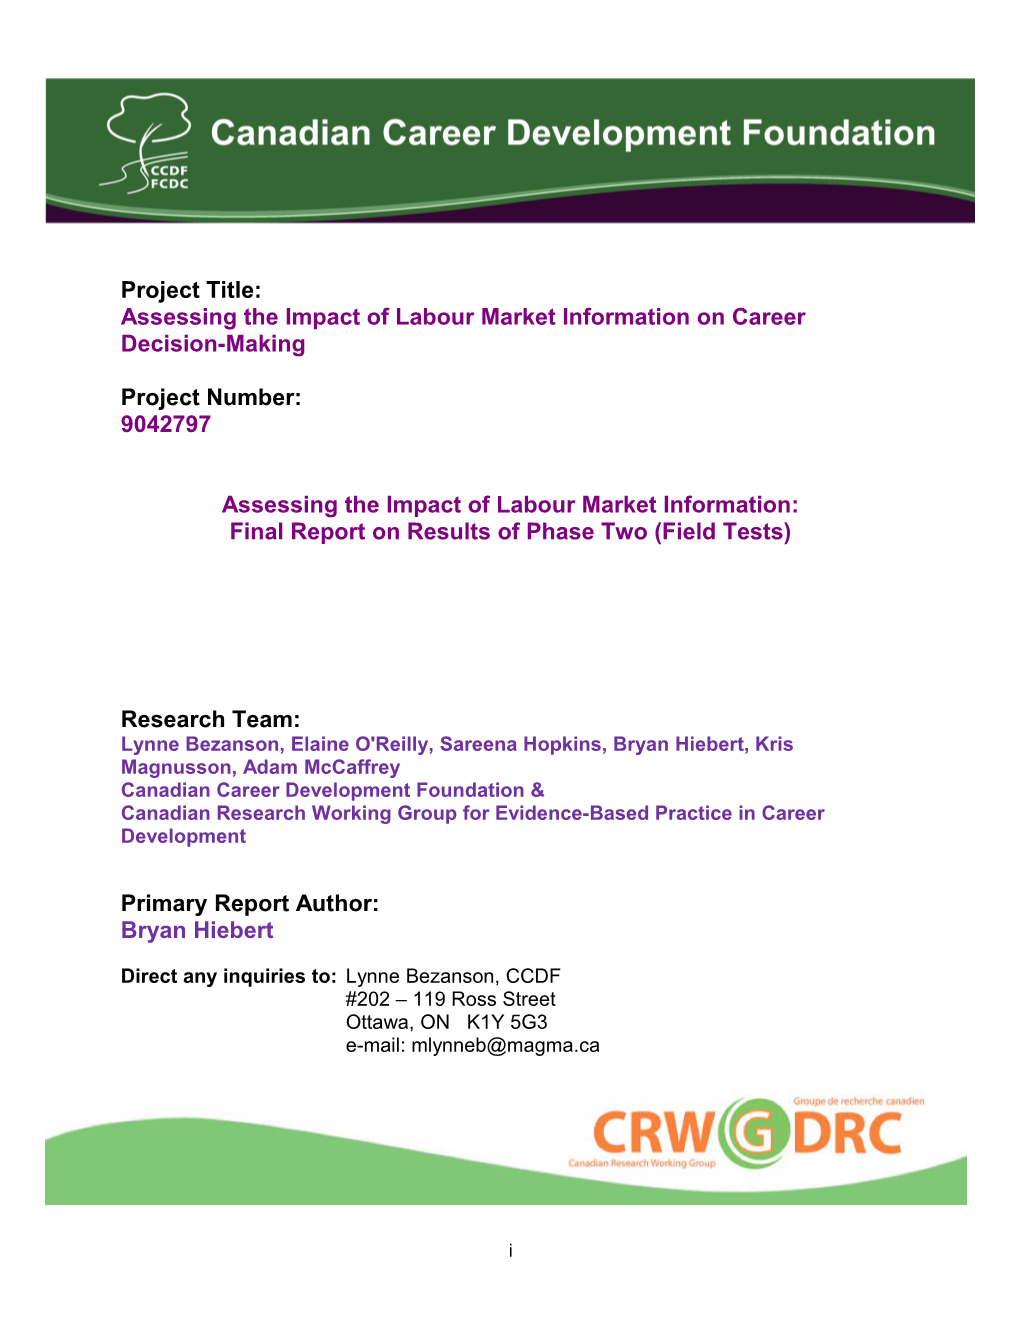 Assessing the Impact of Labour Market Information on Career Decision-Making